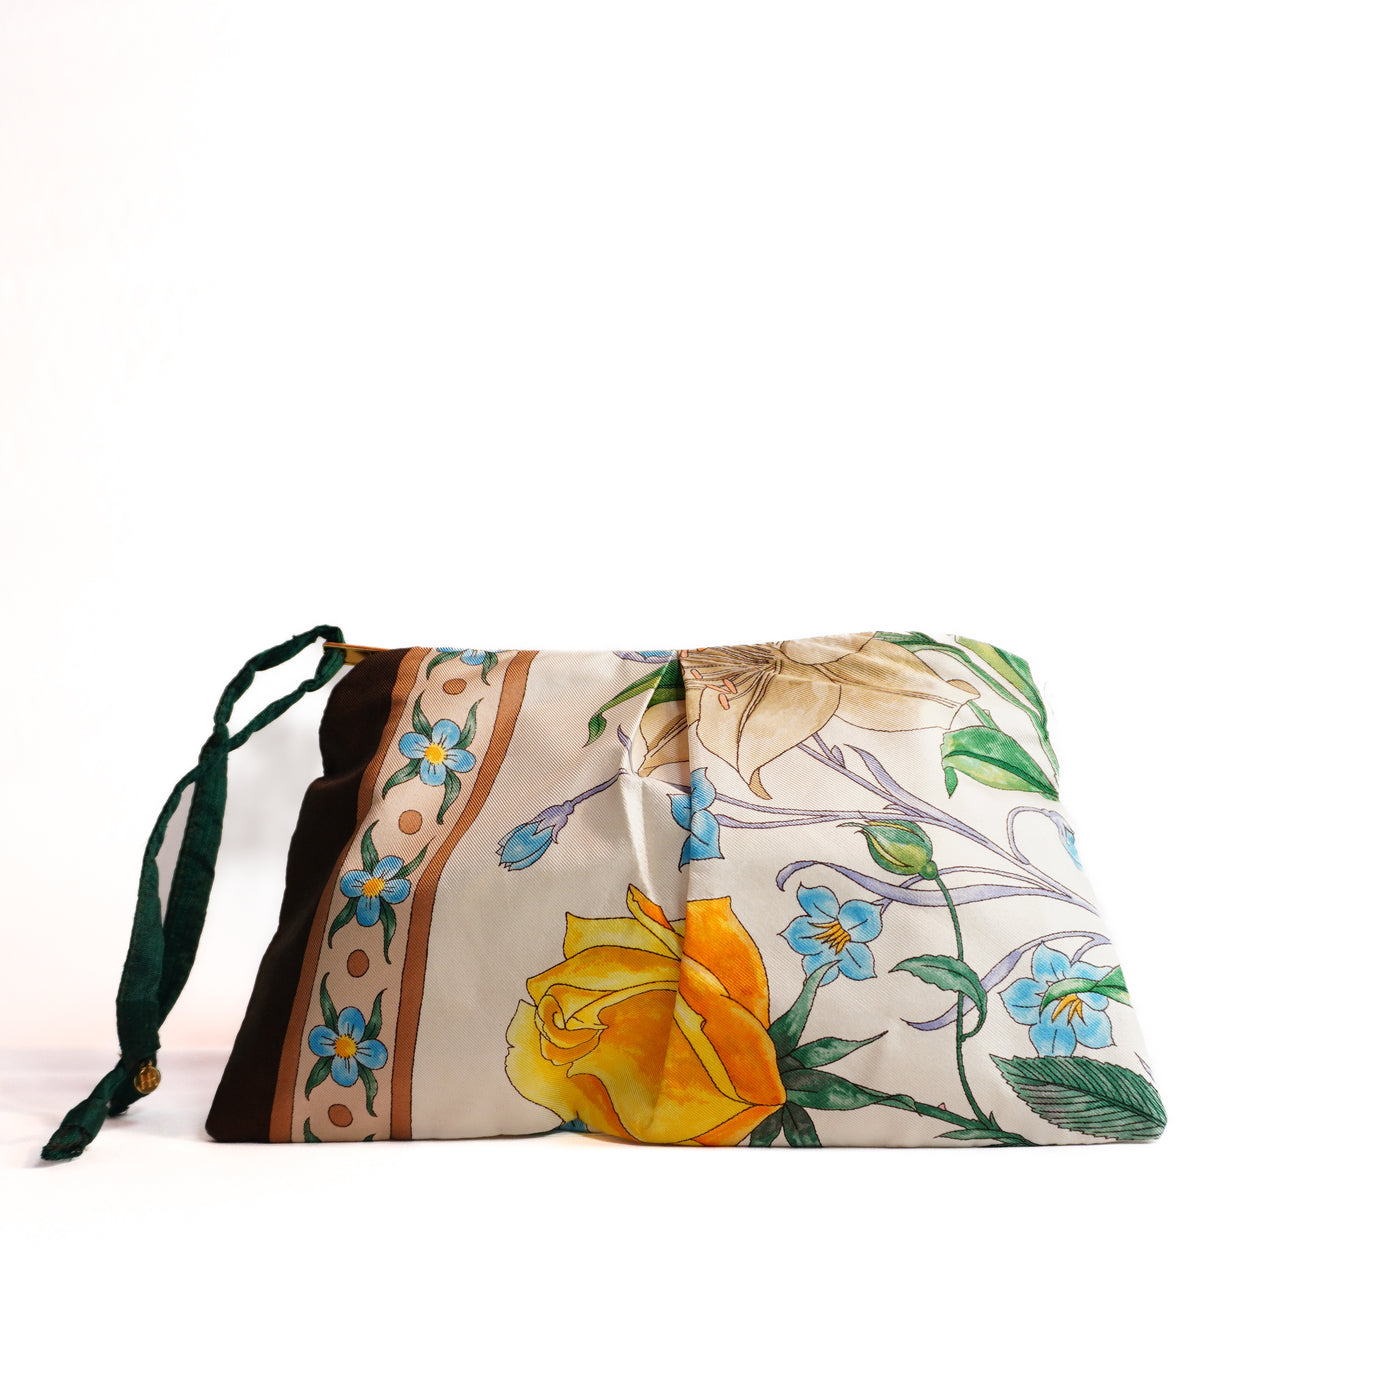 "Blooms" Scarf Bag (Upcycled from Gucci Scarf) Party Clutch Hampton Road Designs   